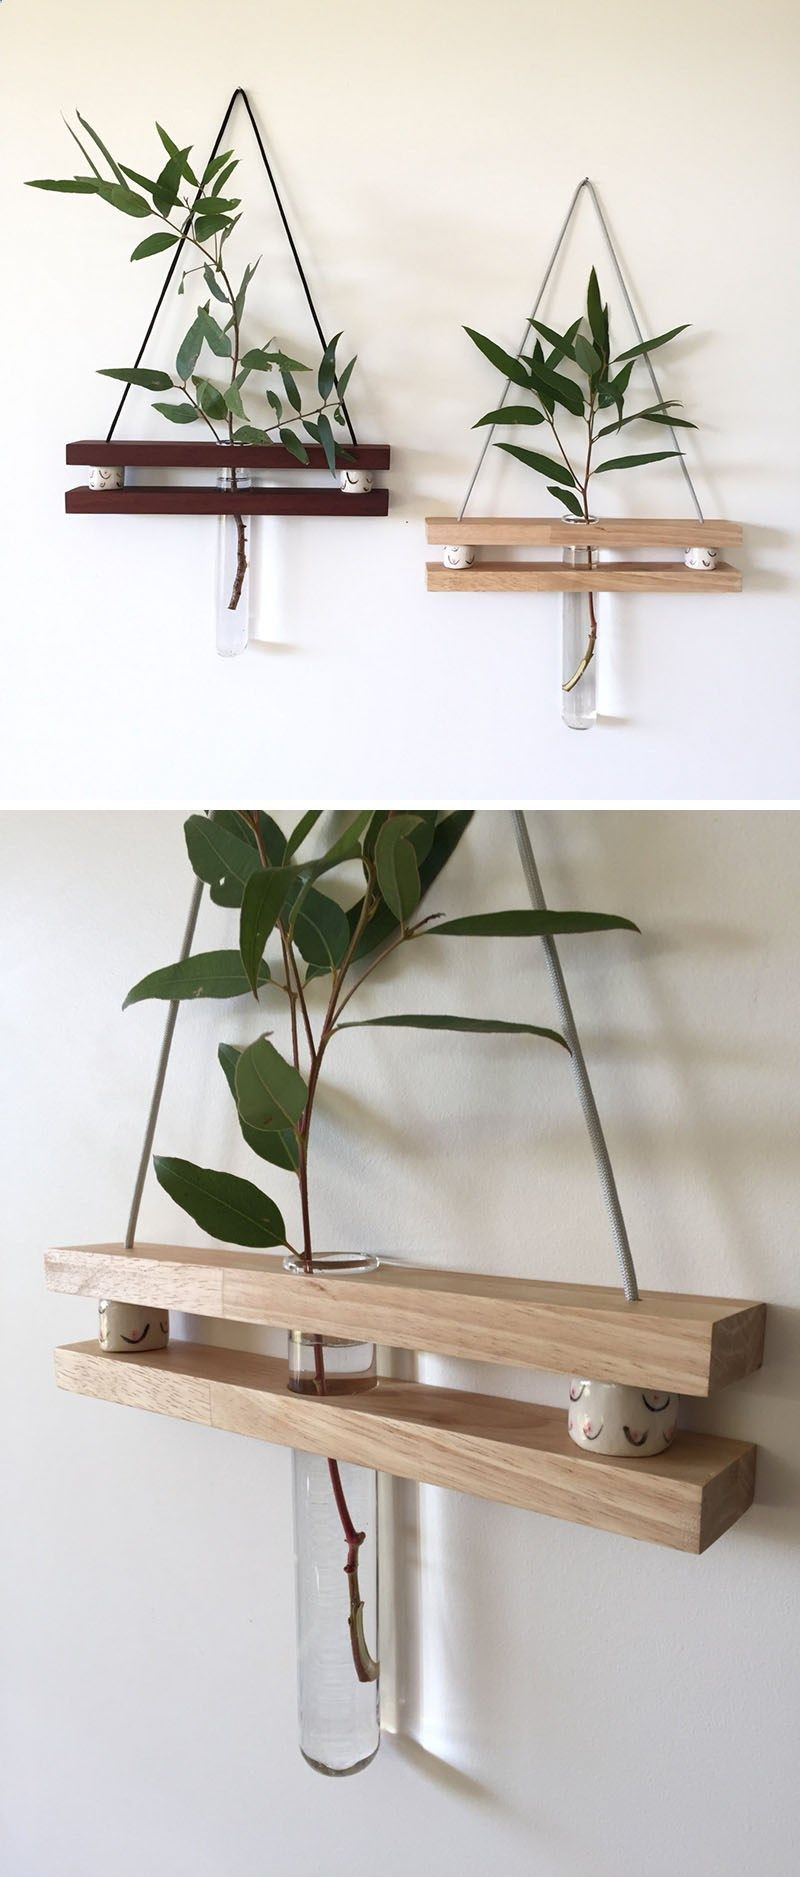 22 Recommended Little Bud Vases 2024 free download little bud vases of these modern hanging wall shelves made from reclaimed wood have a inside these modern hanging wall shelves made from reclaimed wood have a ledge to display a little